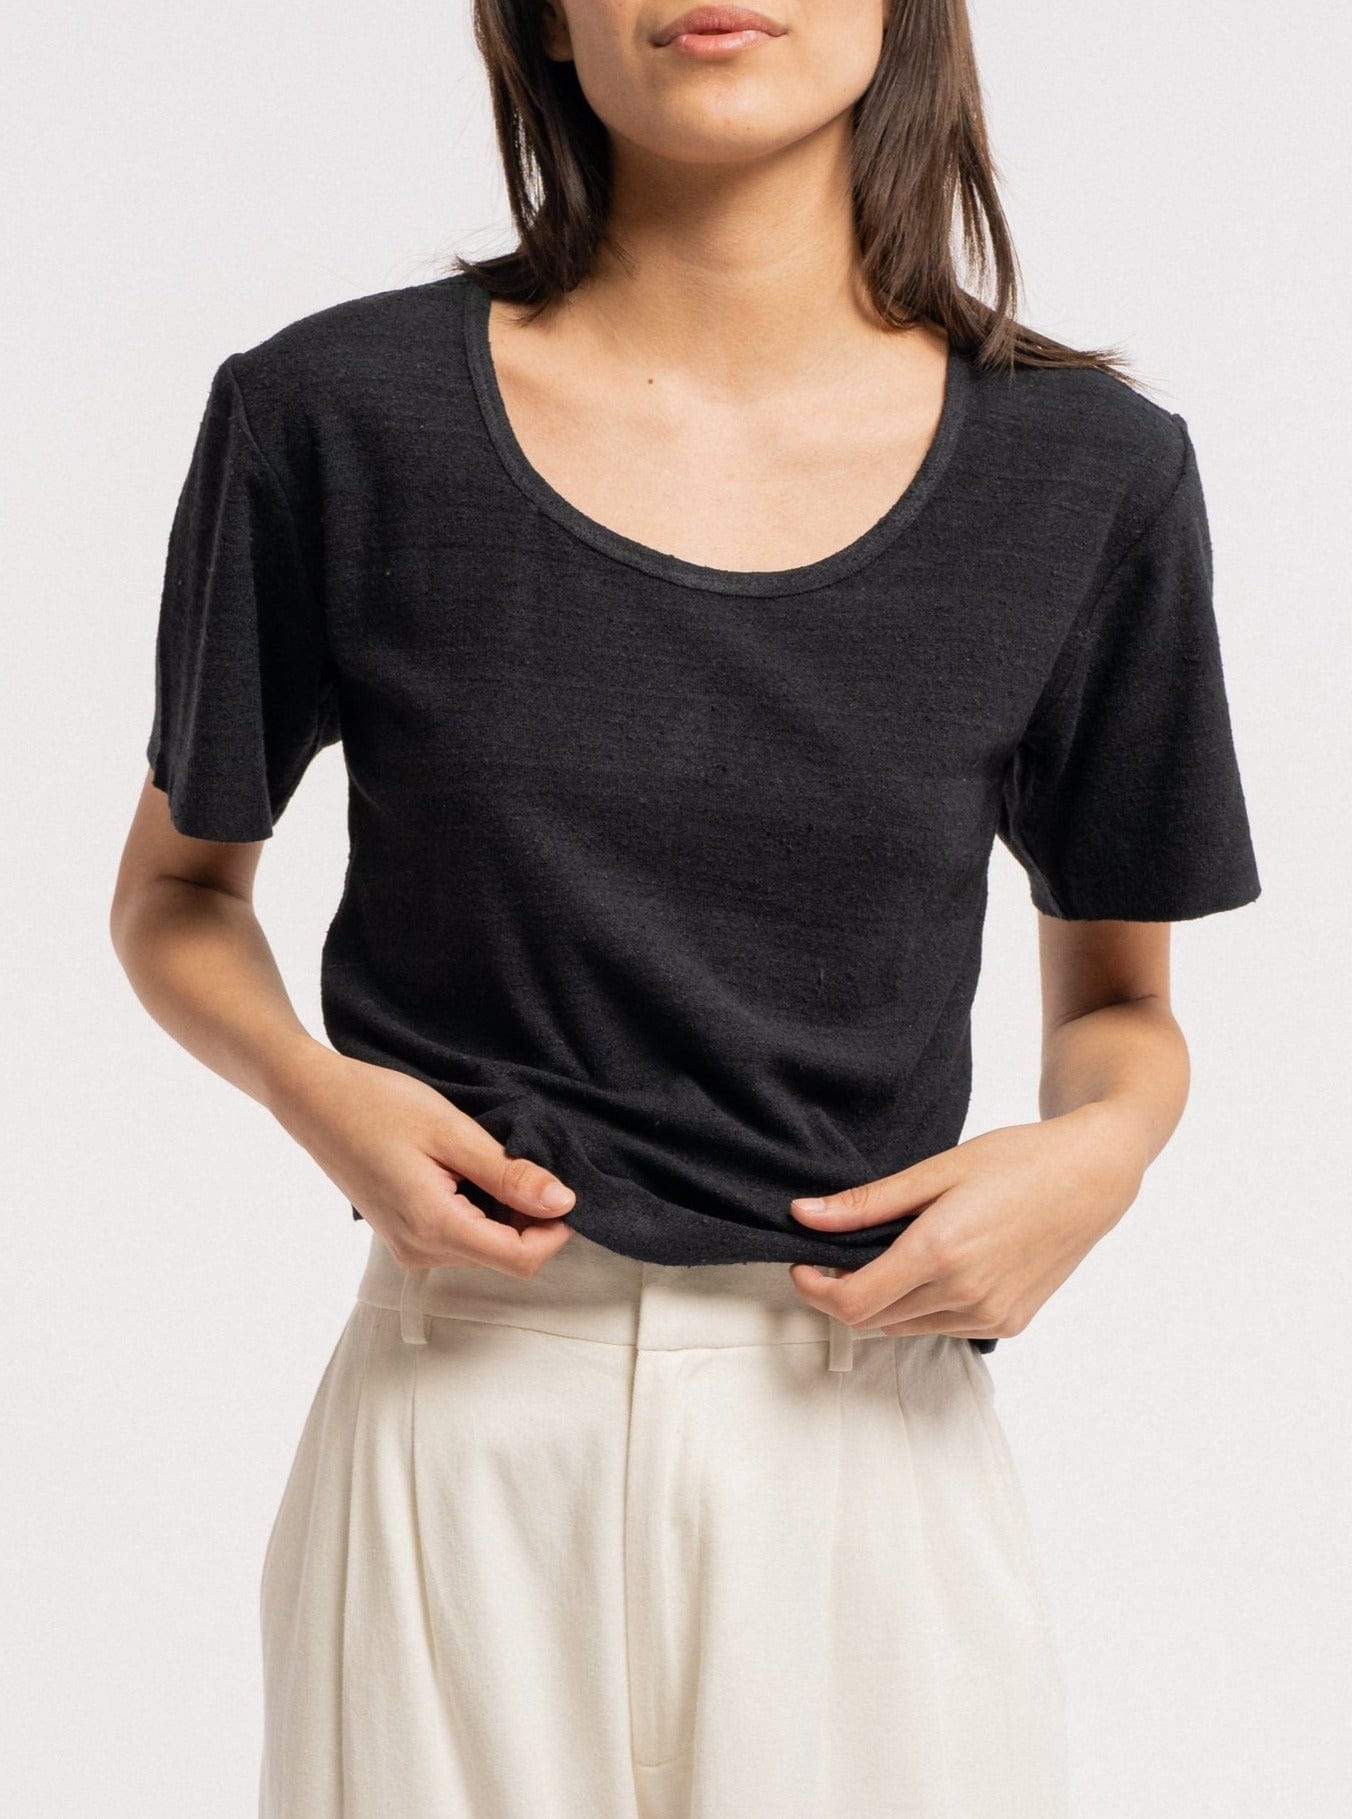 A woman wearing a Baby Tee - Black - pre-order and white pants.